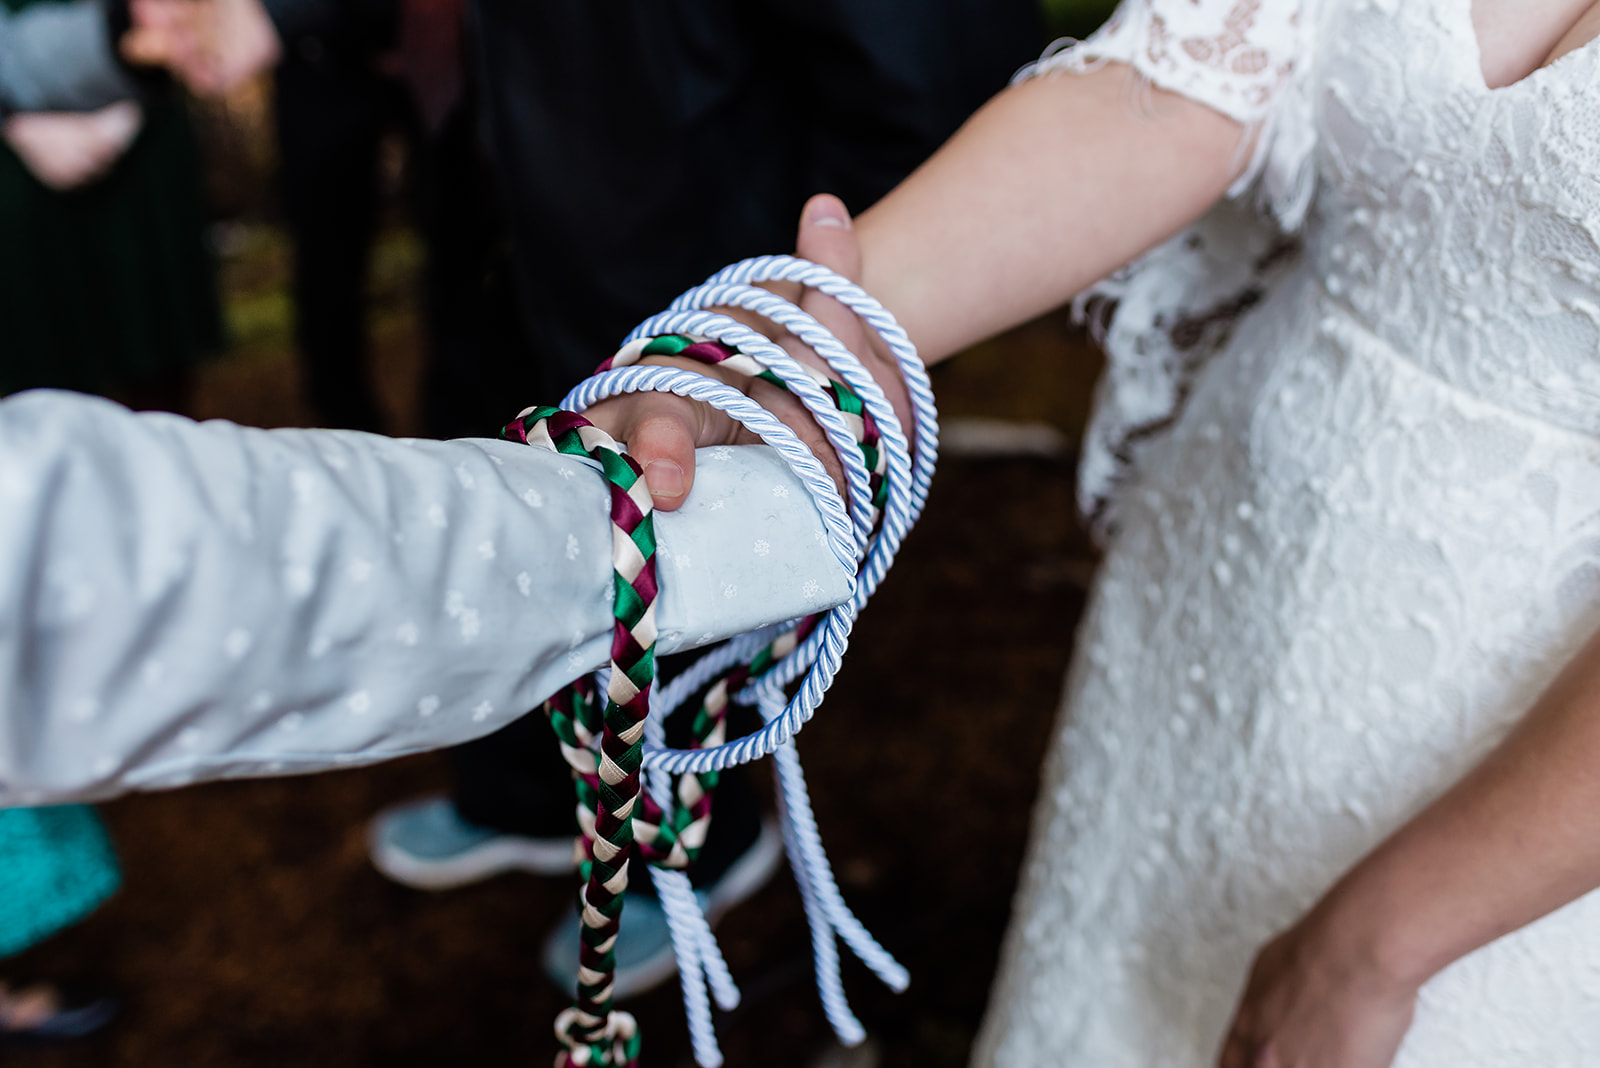 This is a picture taken during an elopement ceremony. It is the bride and groom during a knotting ceremony.